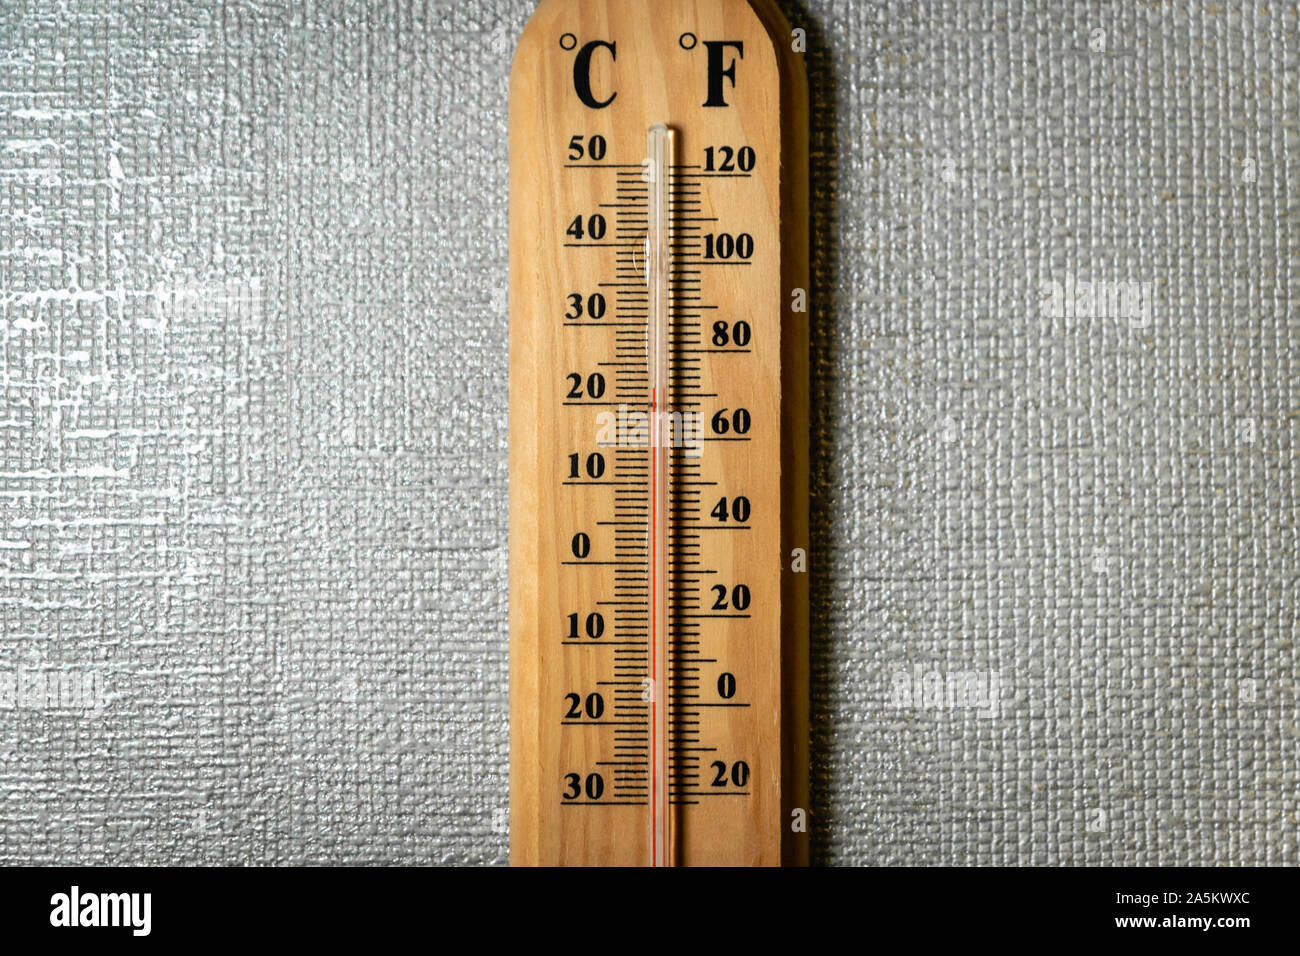 https://c8.alamy.com/comp/2A5KWXC/temperature-gauge-thermometer-on-the-white-wall-analog-temperature-gauge-close-up-2A5KWXC.jpg